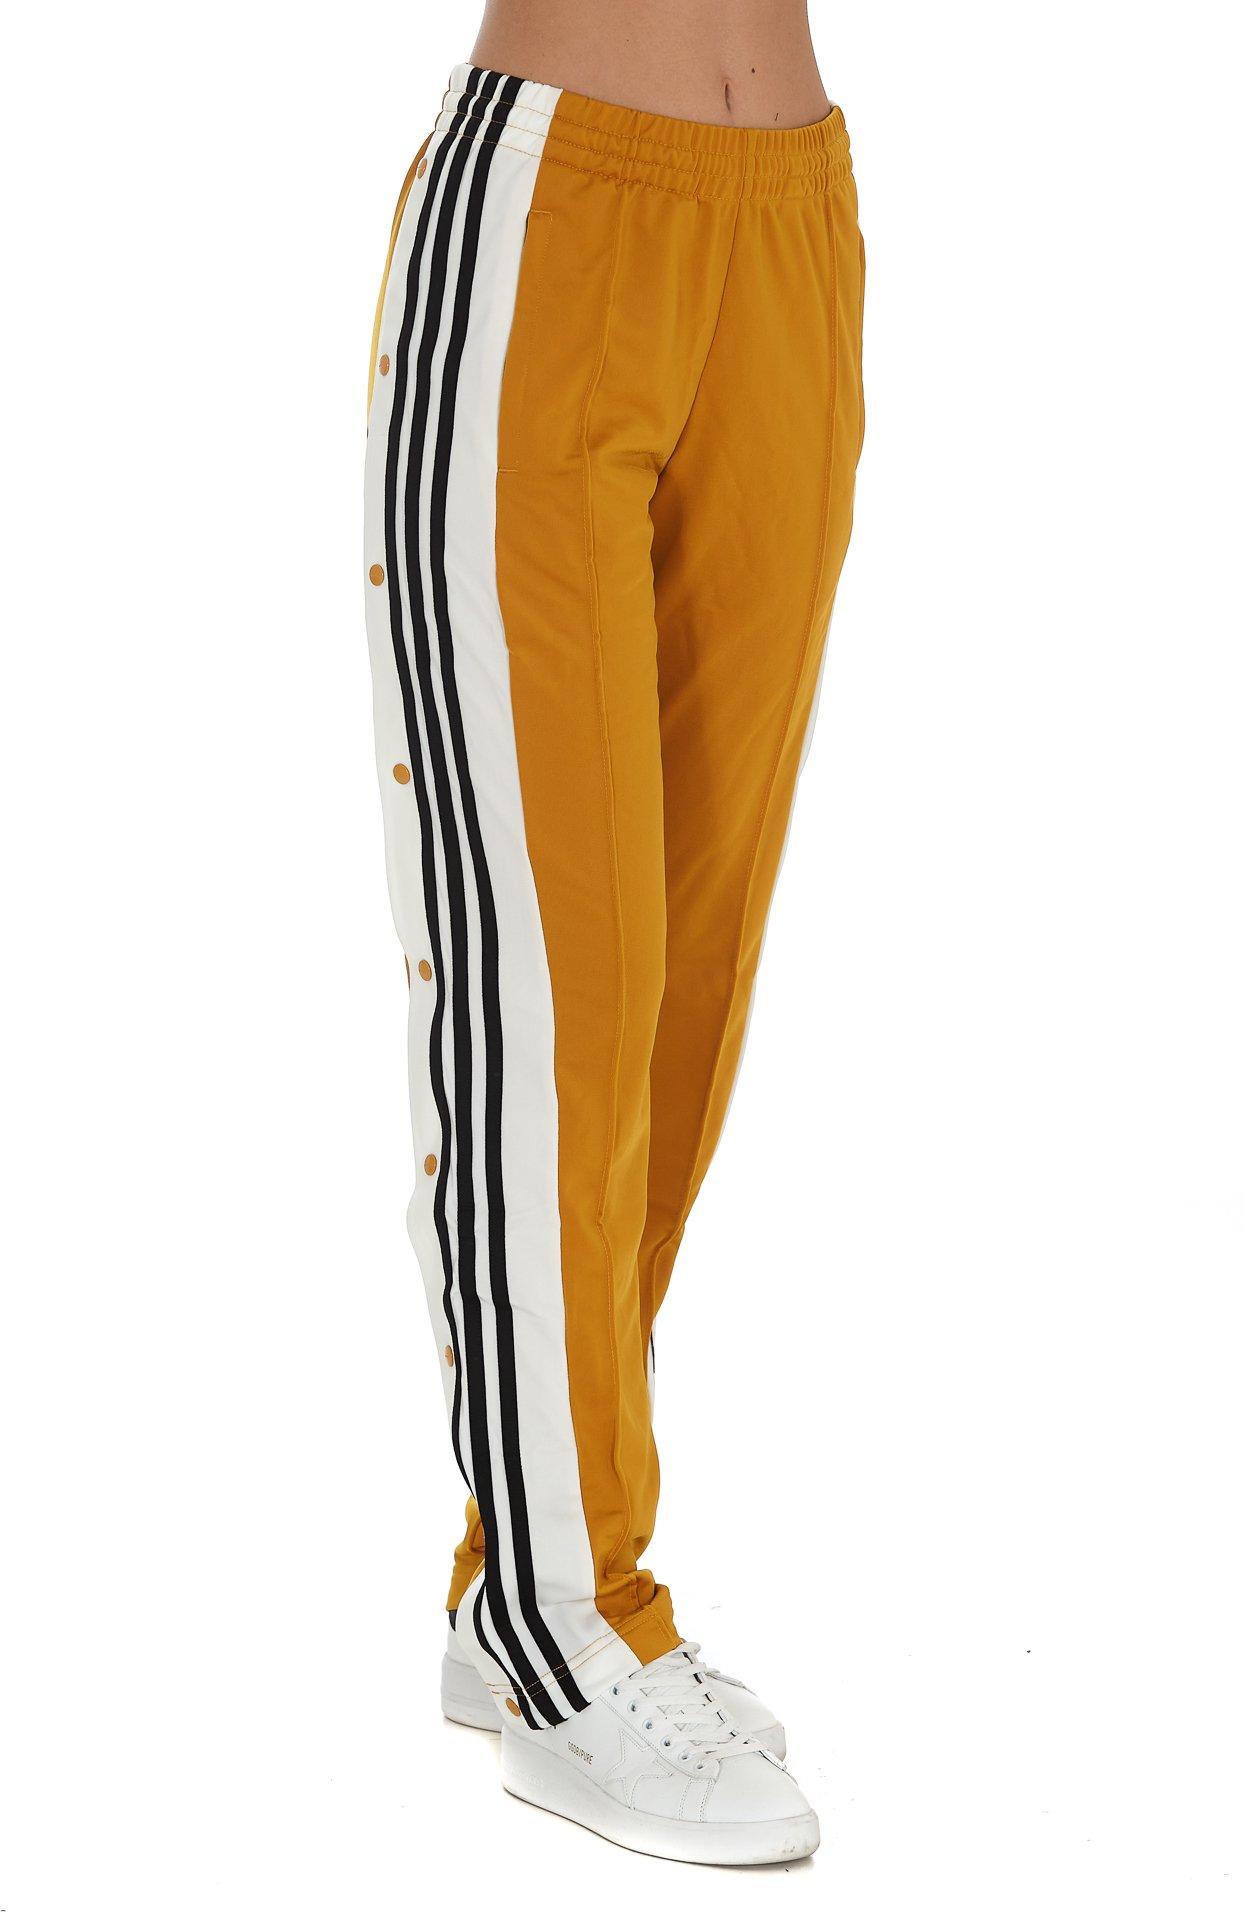 adidas Originals Synthetic Girls Are Awesome Adibreak Pants in Yellow | Lyst